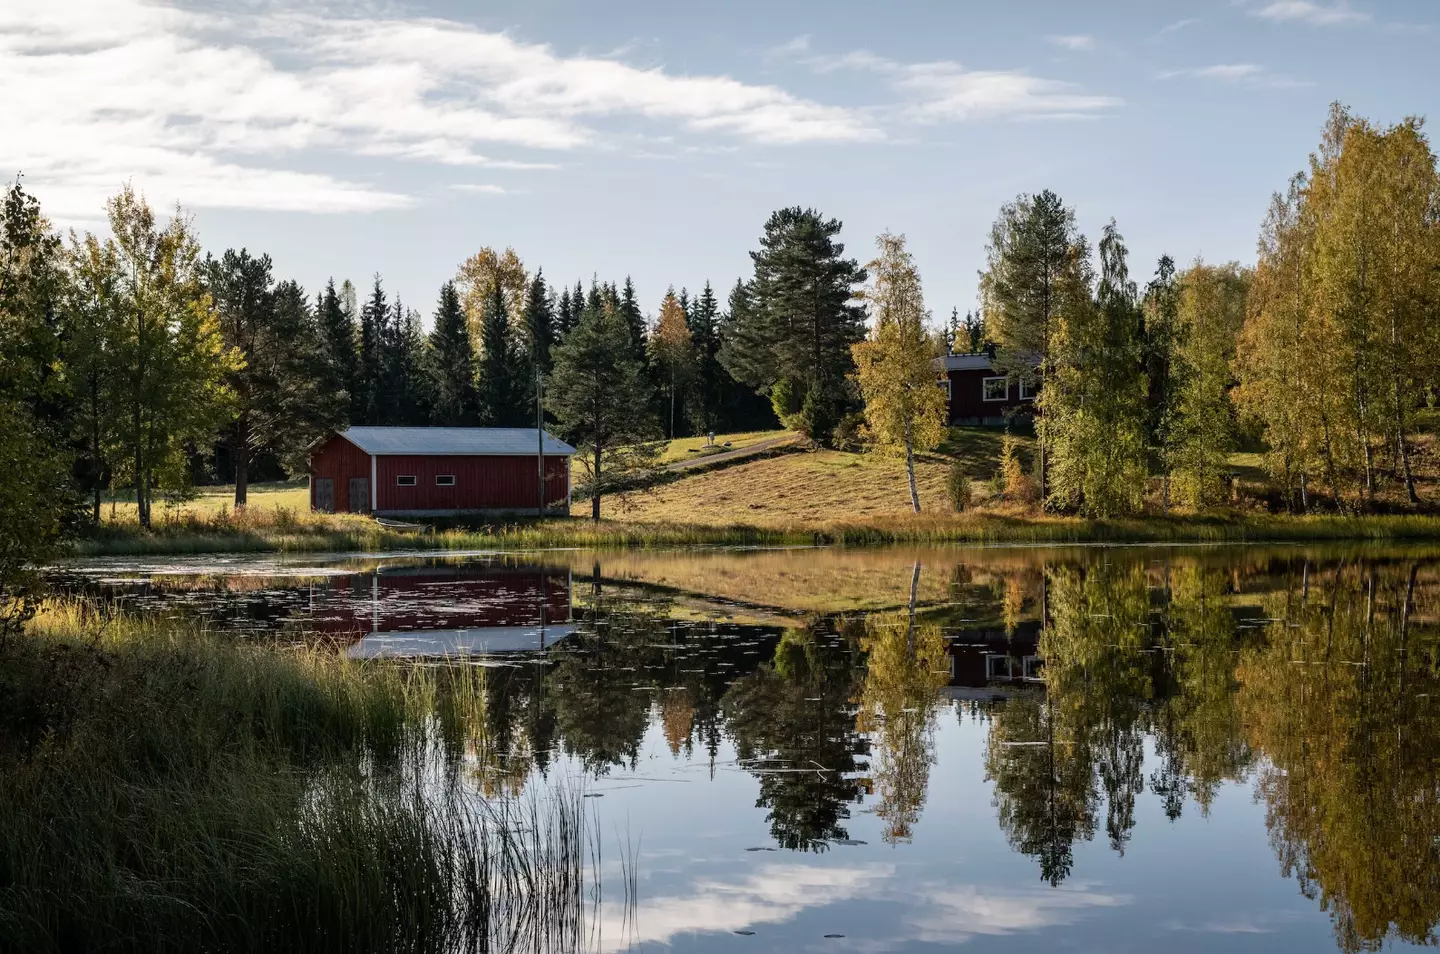 Finland has an abundance of nature that residents can access, thanks to the Everyman's Right.